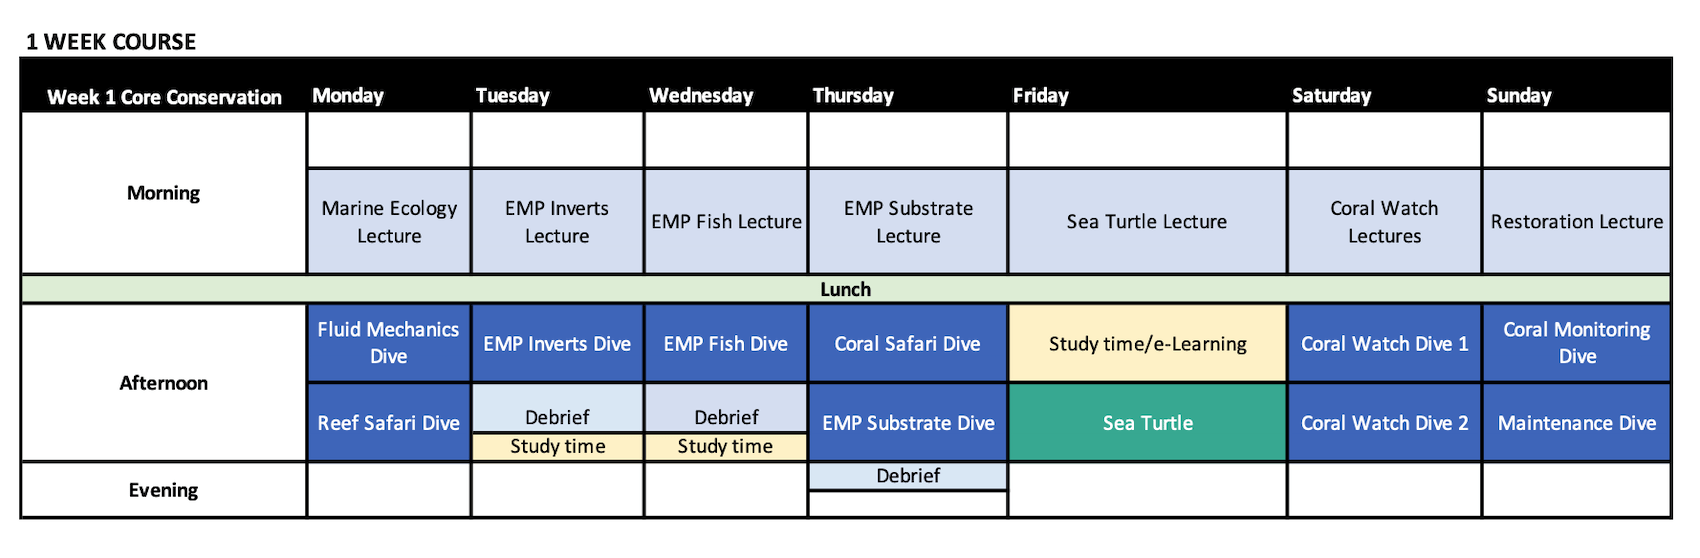 7 Day Core Conservationist Schedule at Black Turtle Dive